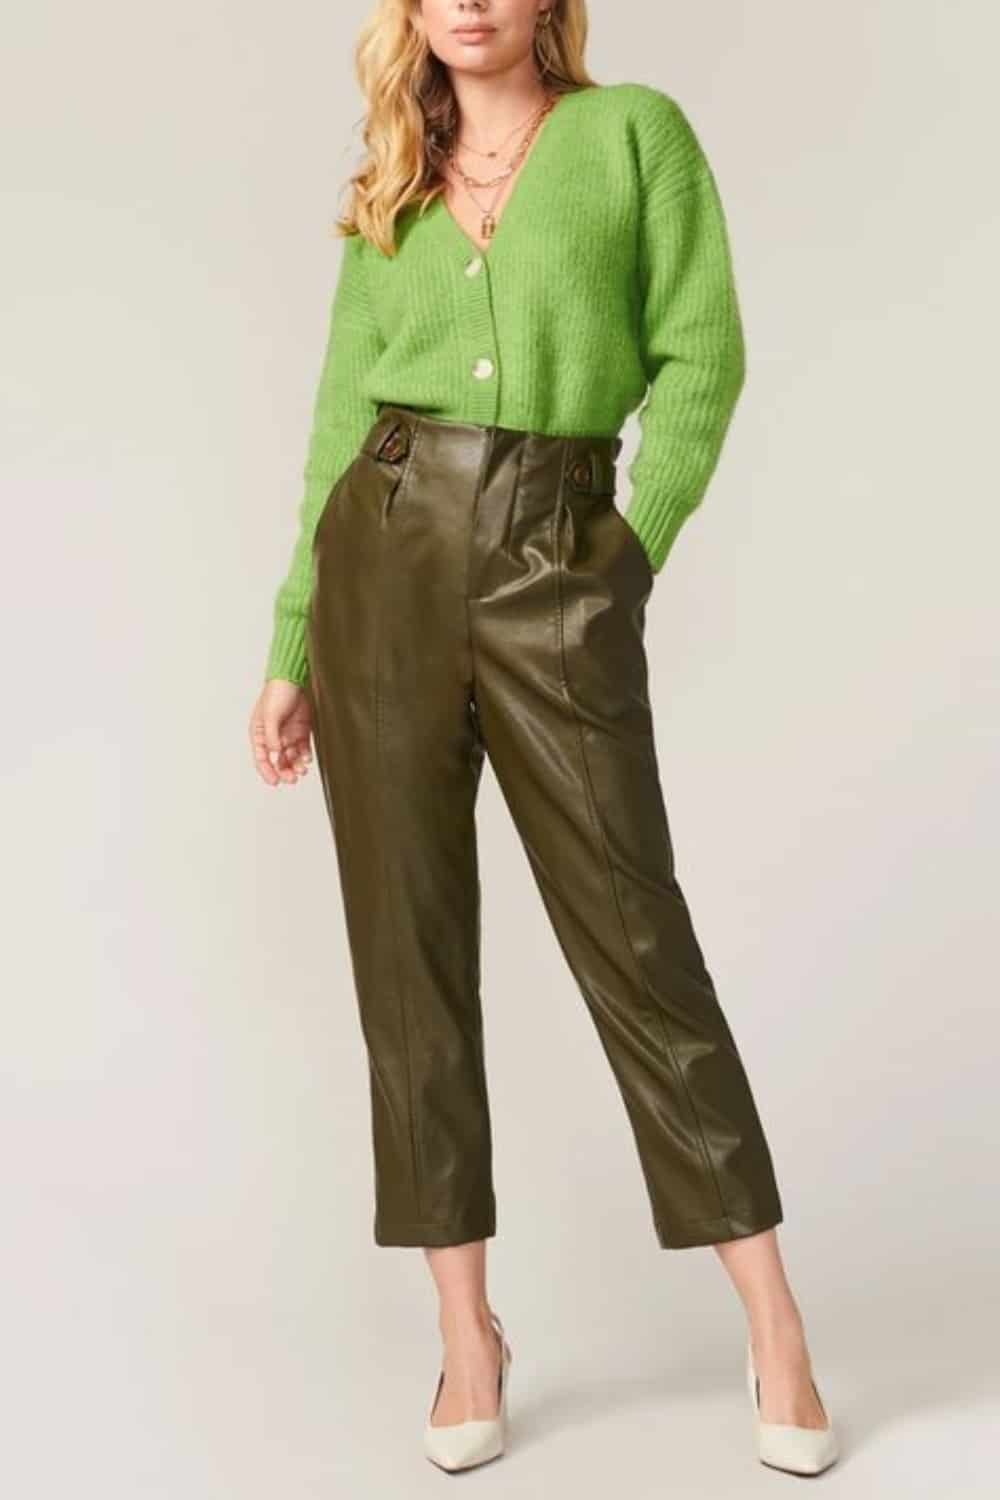 Bar Outfit for Ladies - V Neck Cardigan with Leather Pants